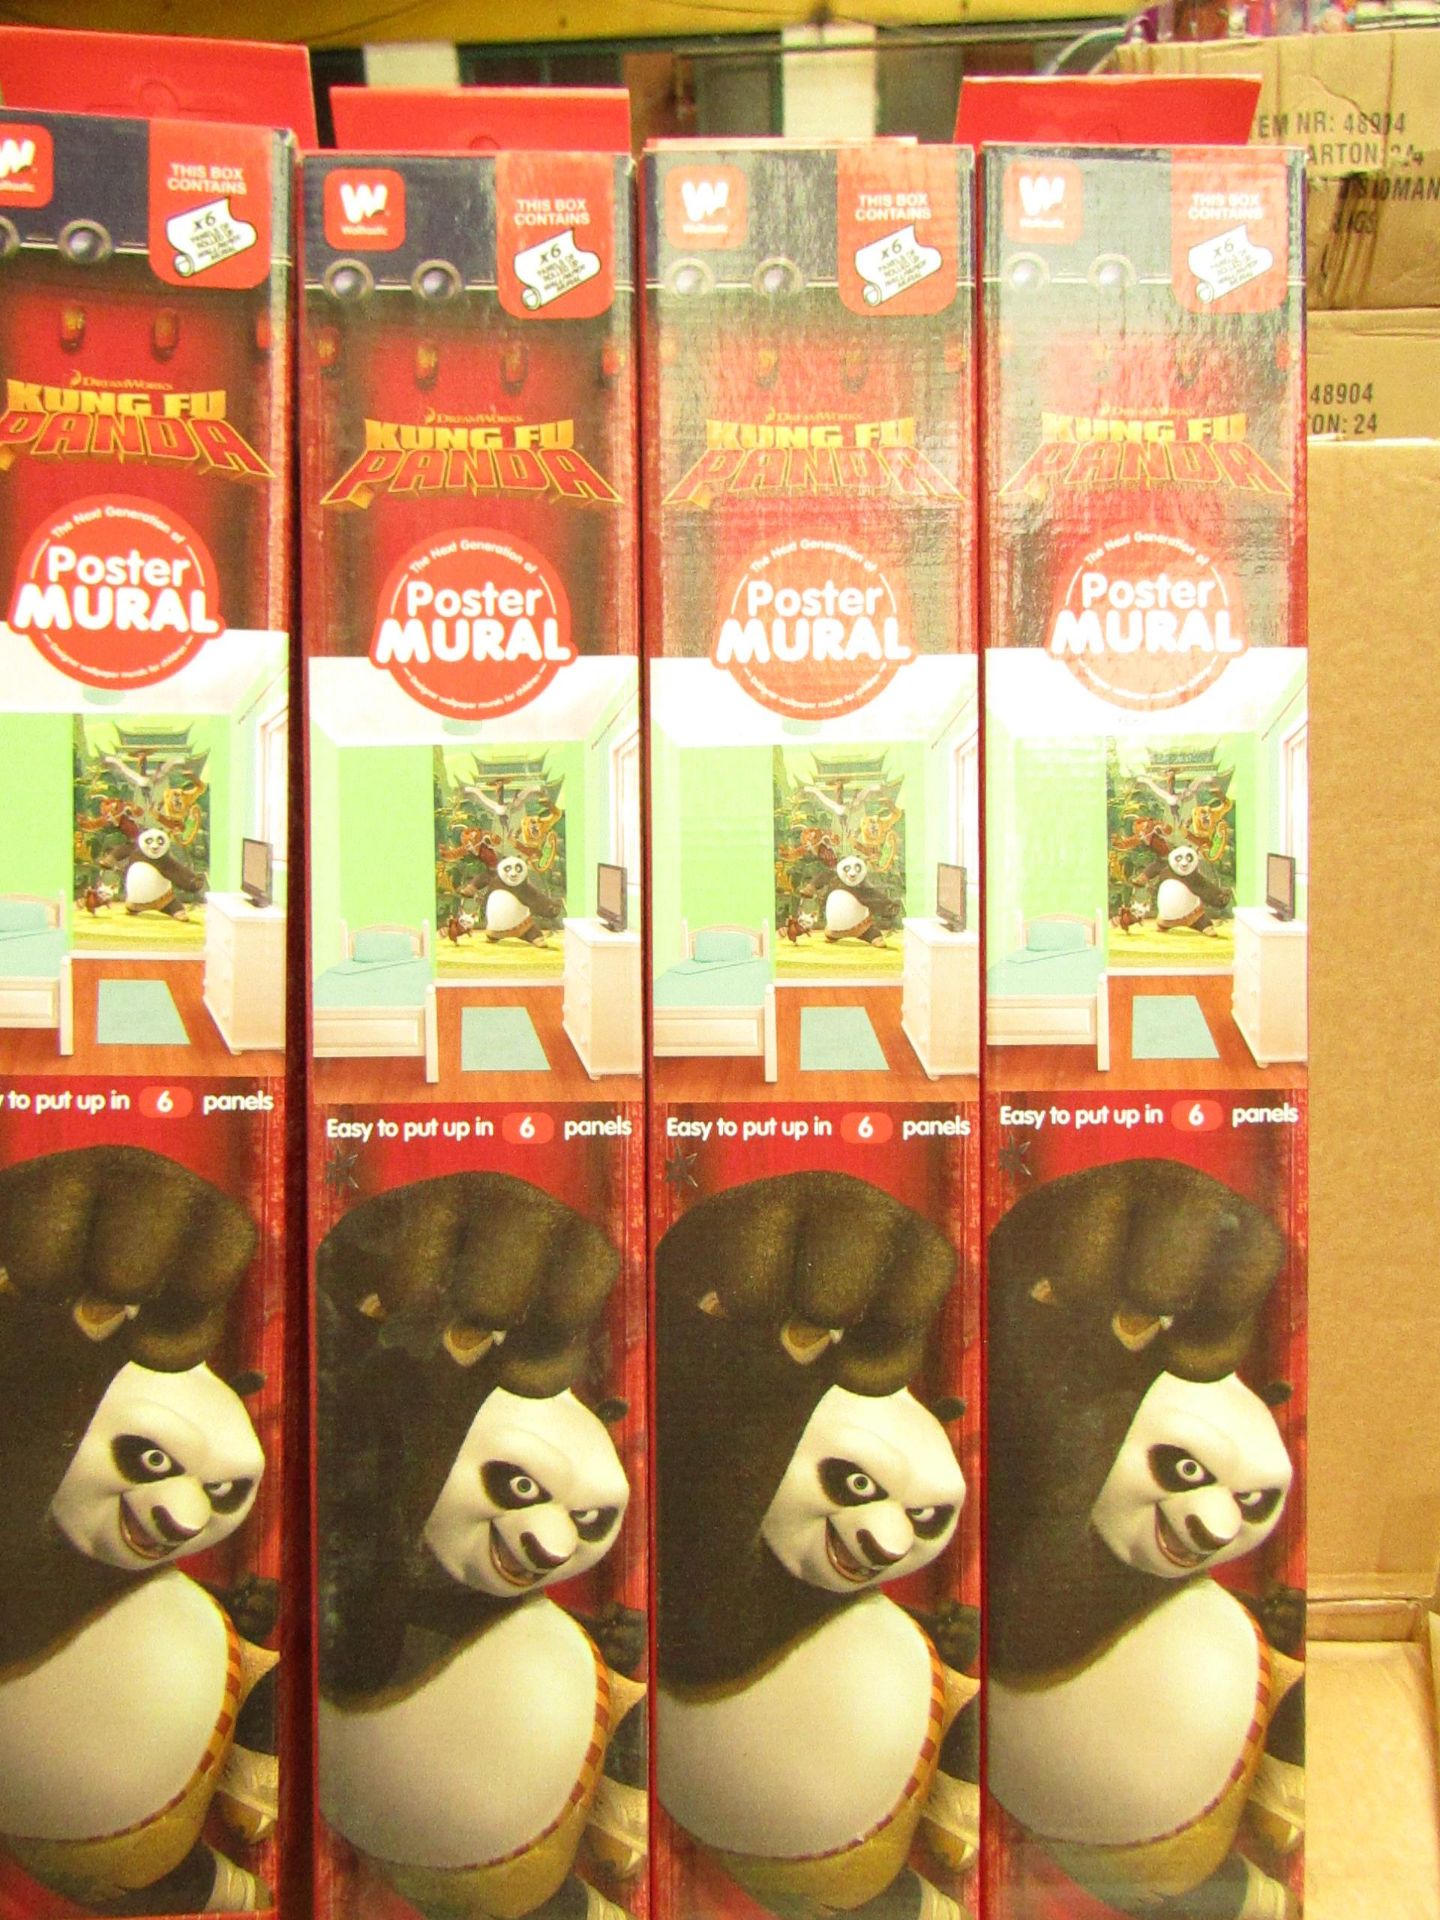 Walltastic Kung Fu Panda Poster Mural. Easy To Put Up in 6 Panels. Overall Size 8Ft x 5Ft. New &